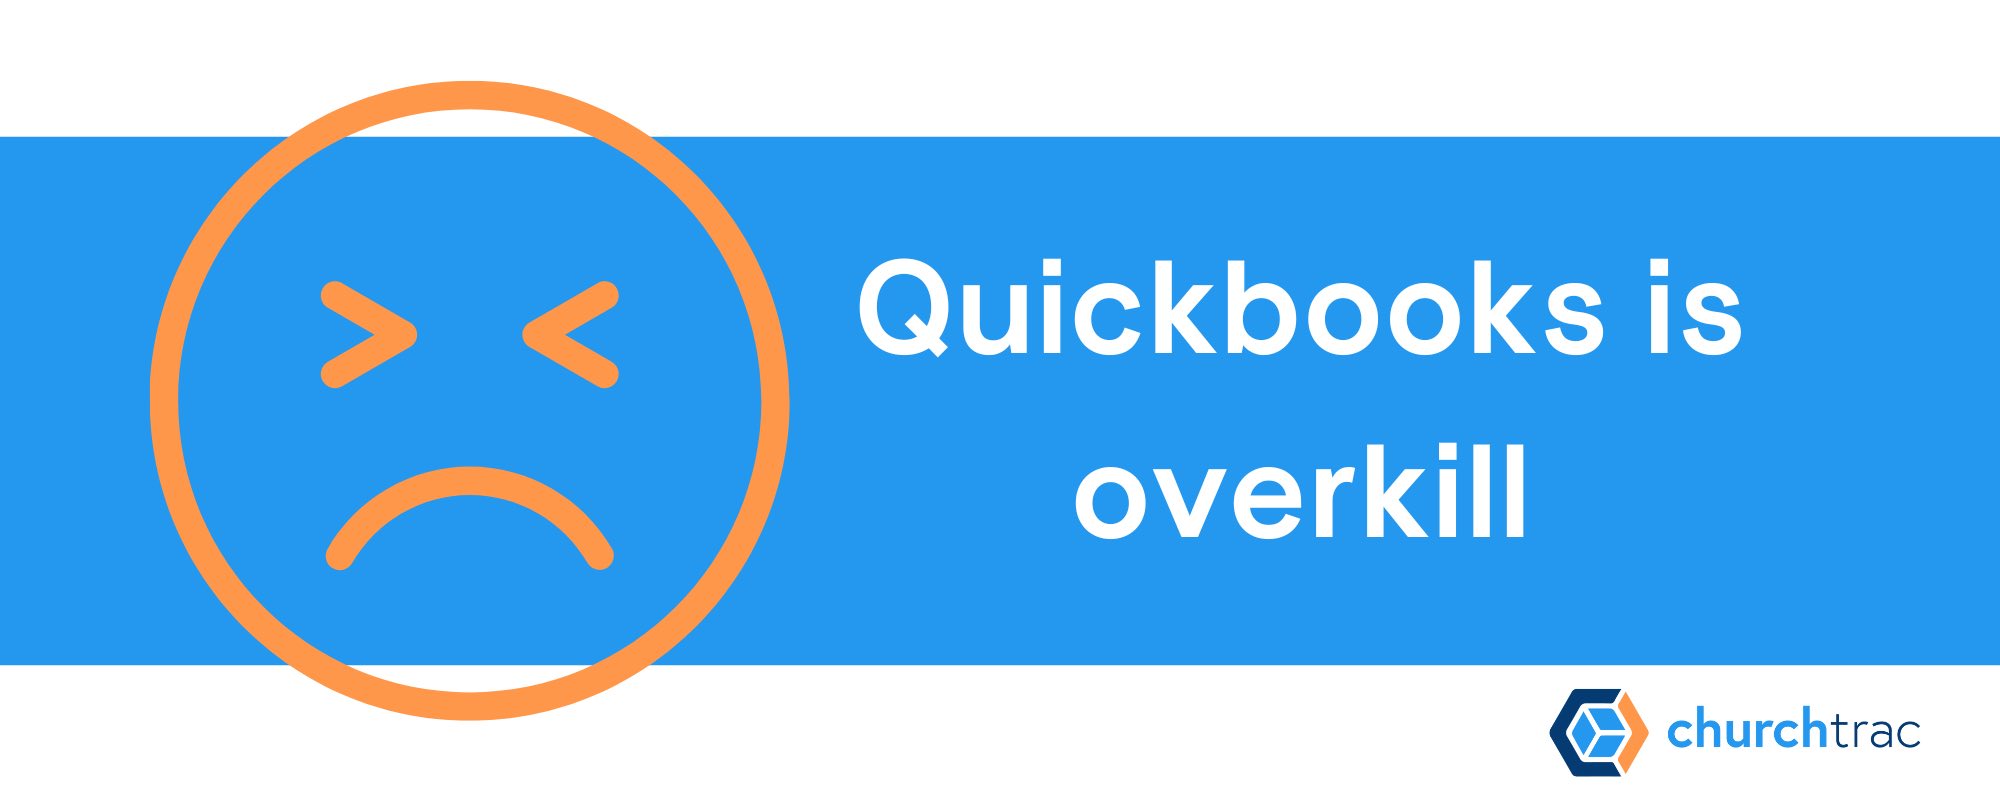 Quickbooks is overkill for churches and doesn't work for ministries